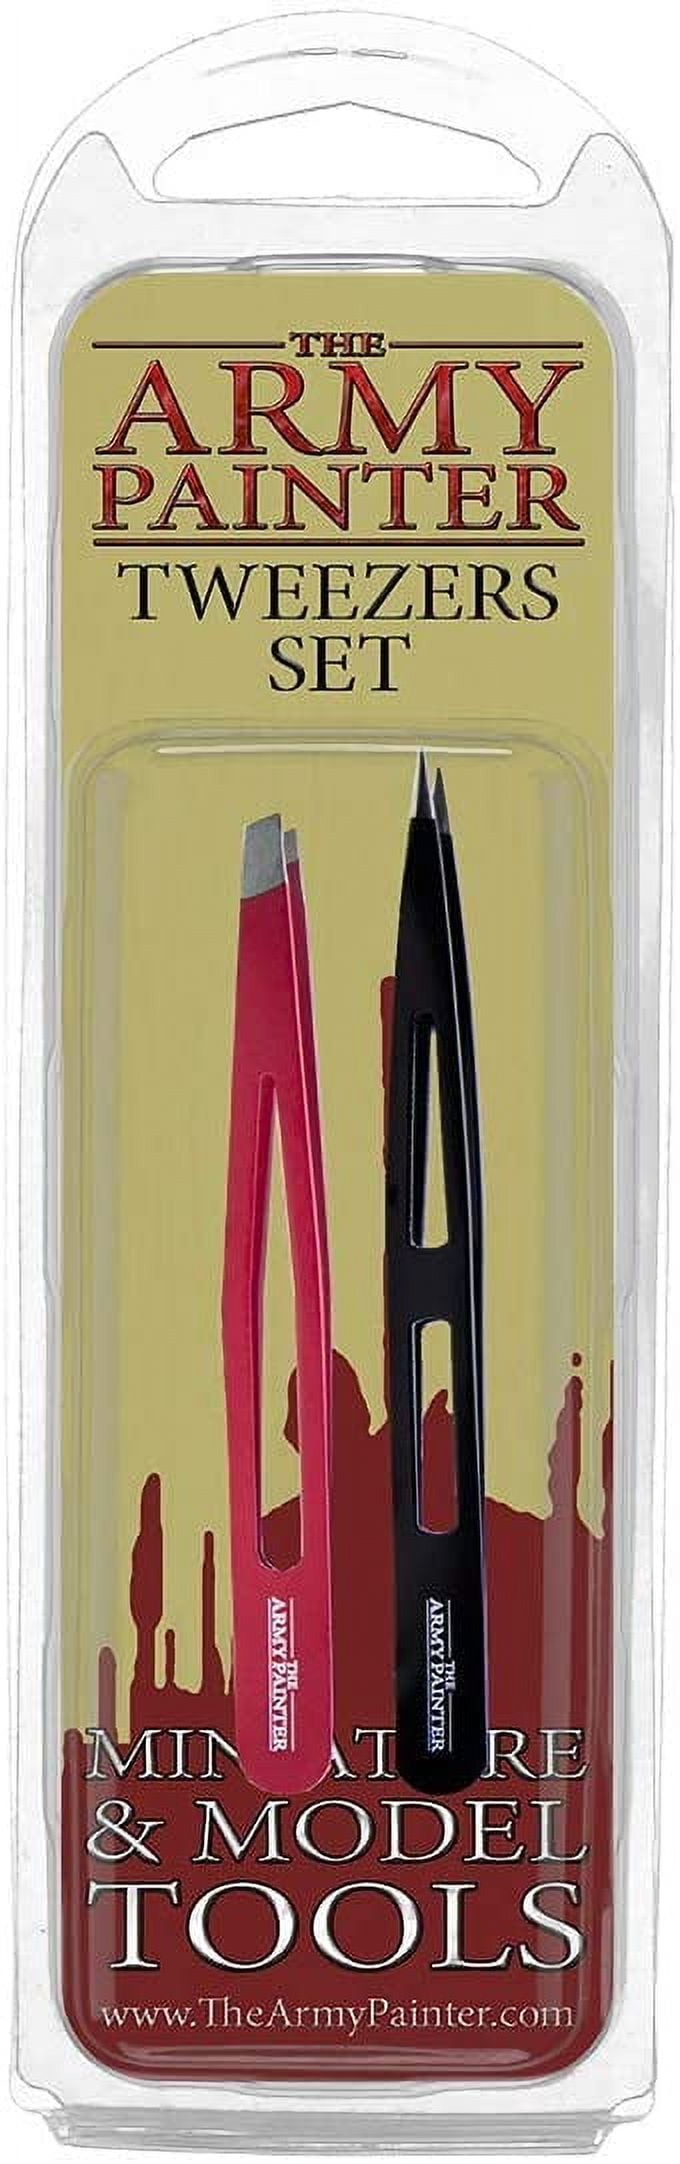 The Army Painter 2-Piece Precision Tweezers Set of Slant & Pointy Tweezers  Craft Tweezers Precision Fine Point for Assembling Miniatures- Small